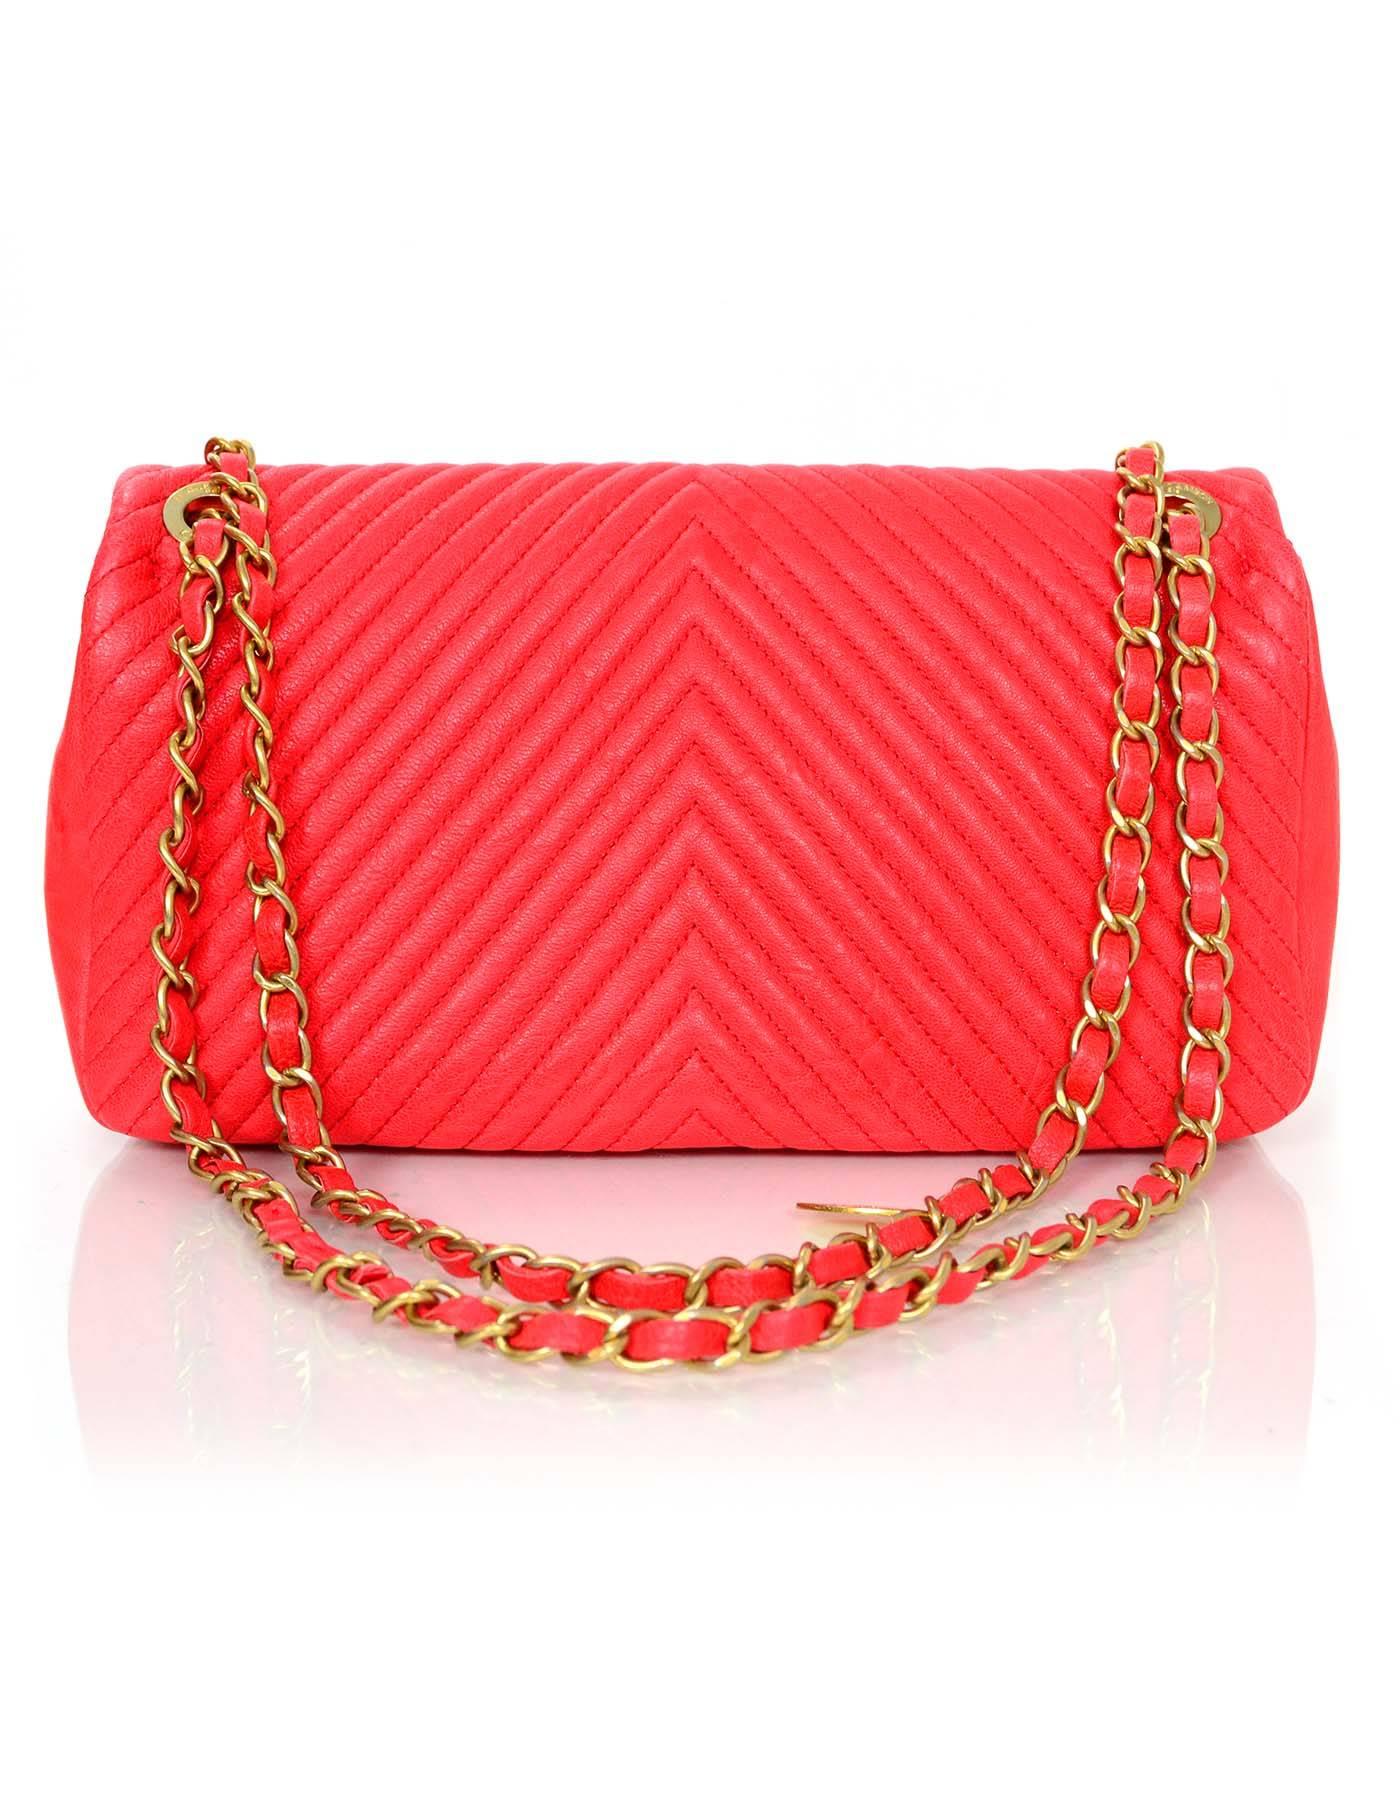 Chanel Coral Wrinkled Chevron Leather Flap Bag In Excellent Condition In New York, NY